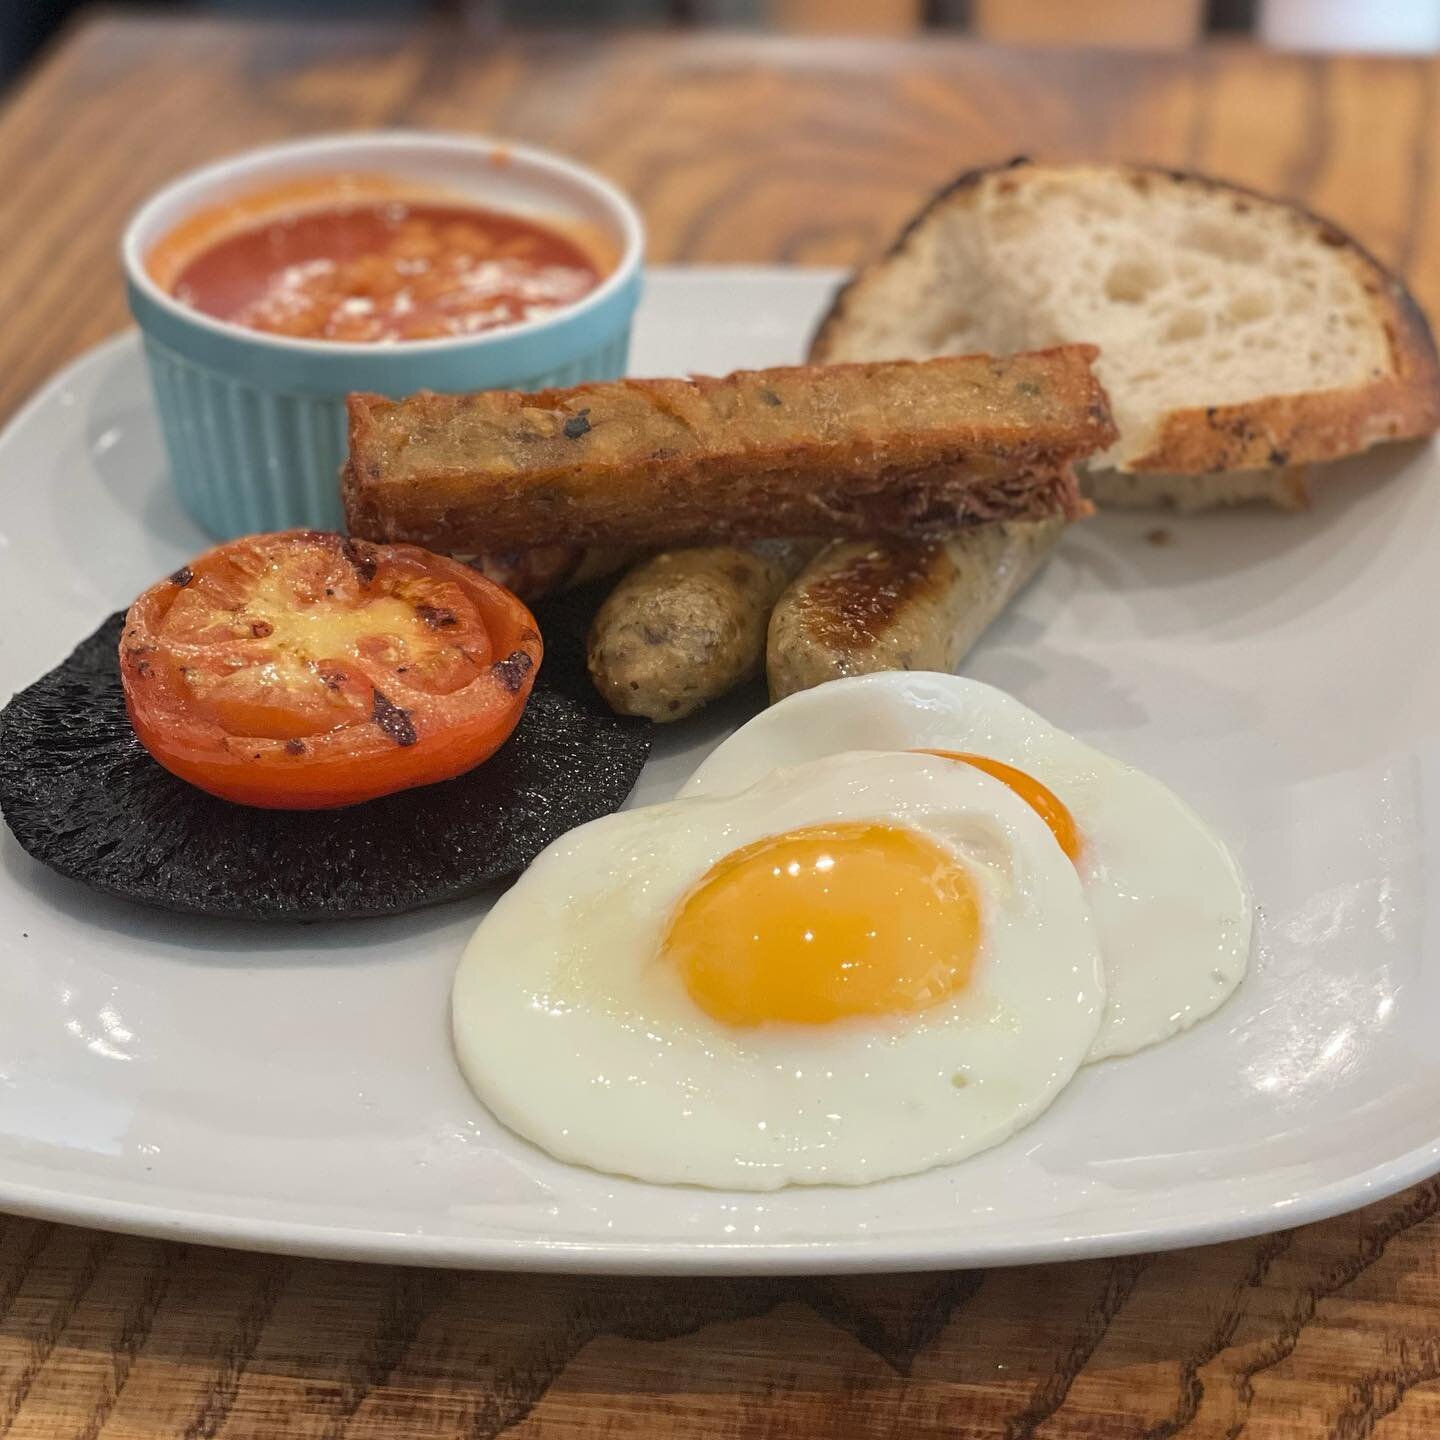 The veggie (upgraded) 🚀 

Just look at our new homemade hash browns and sourdough !

#acutabove #groundedbrothers #local #ethical #rustic #eggs #restaurant #foodie #awards #pending #goodafternoon